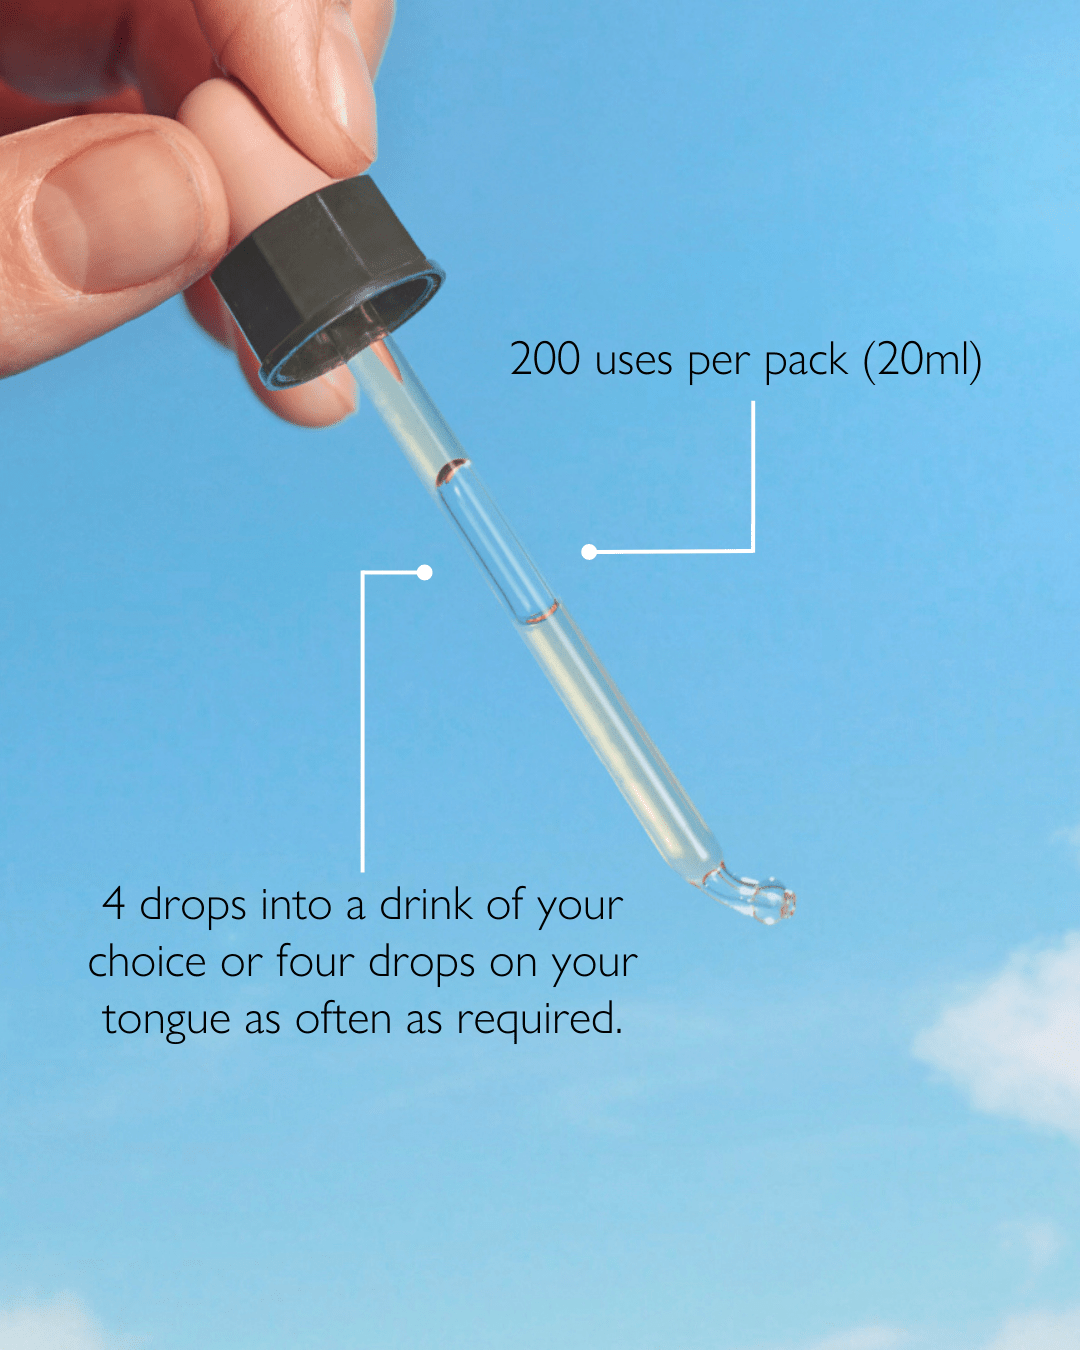 Infographic which contains two fingers holding the Rescue Plus Dropper and says"200 uses per pack , 4 drops into a drink of your choice of four drops on your tongue as often as required